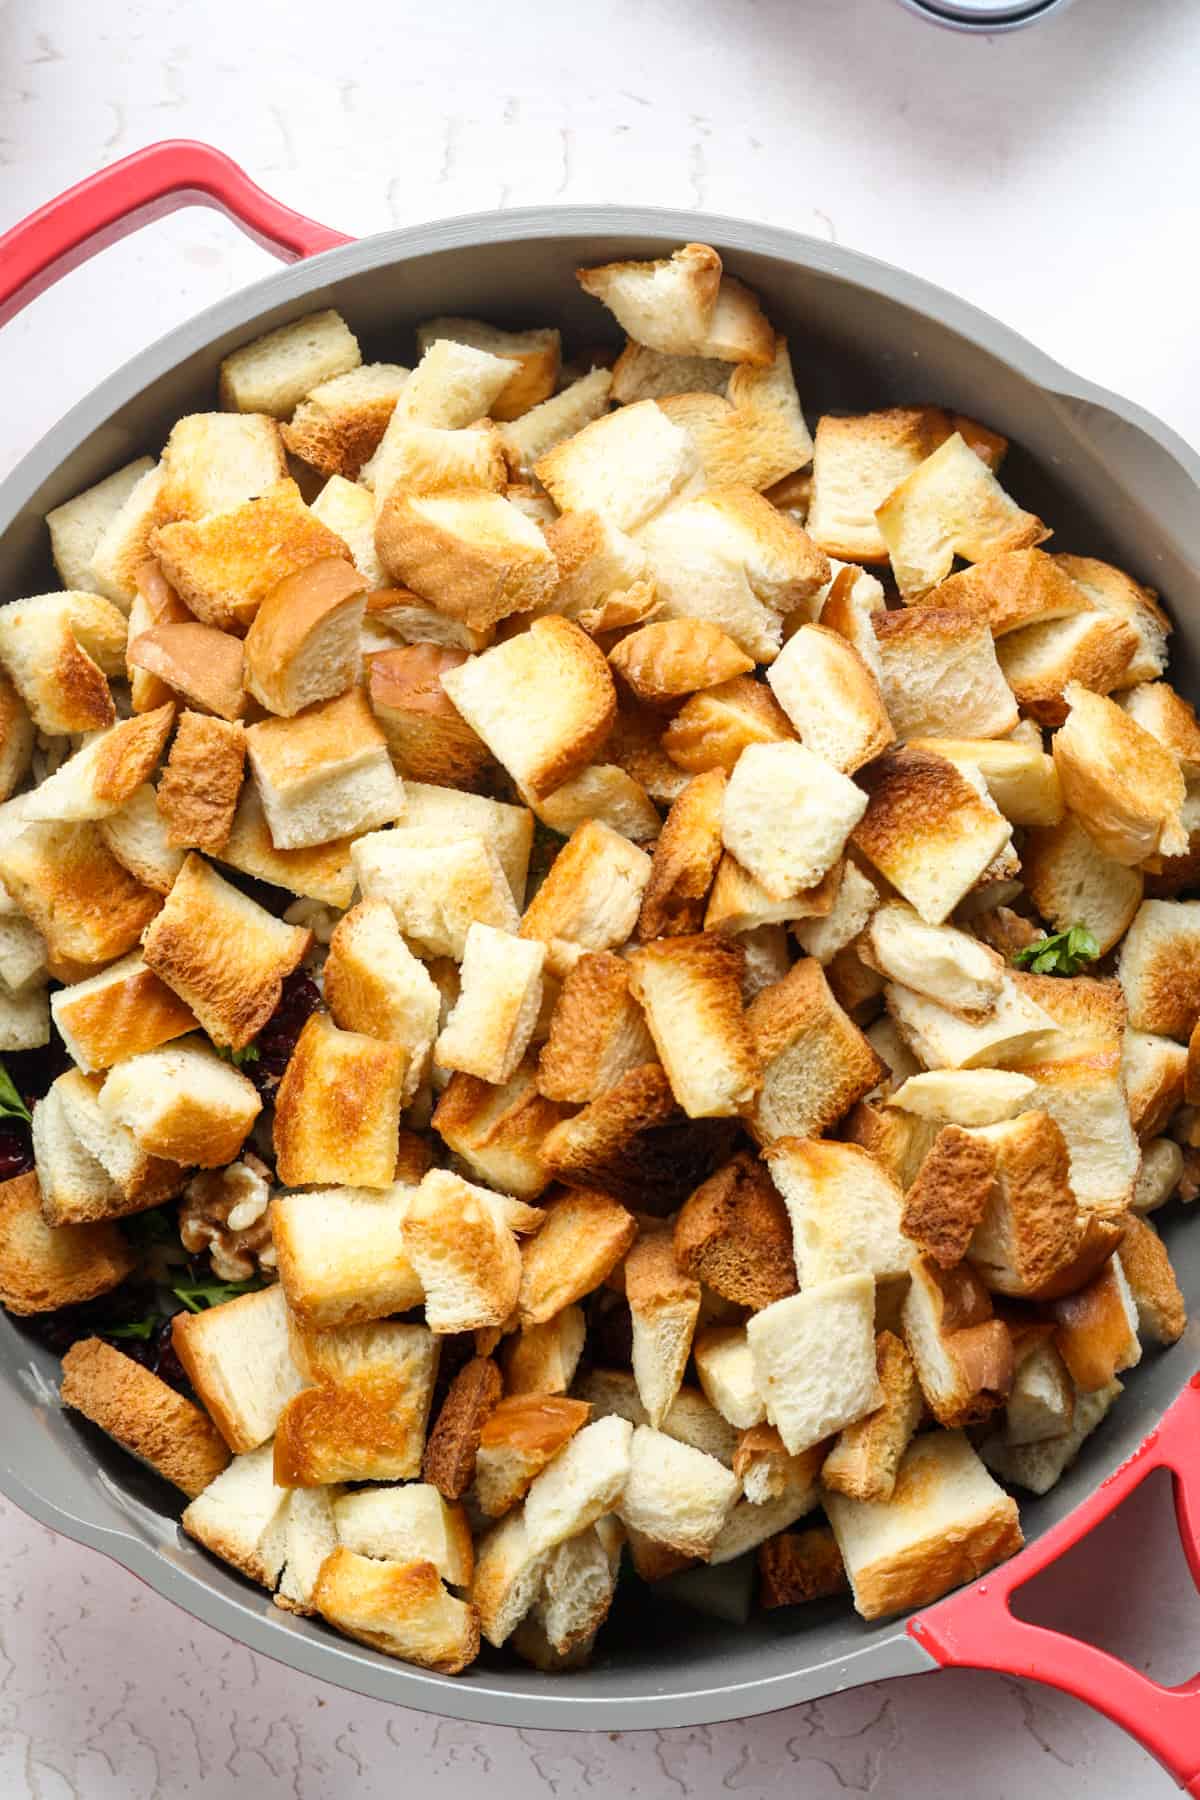 Croutons in pan.